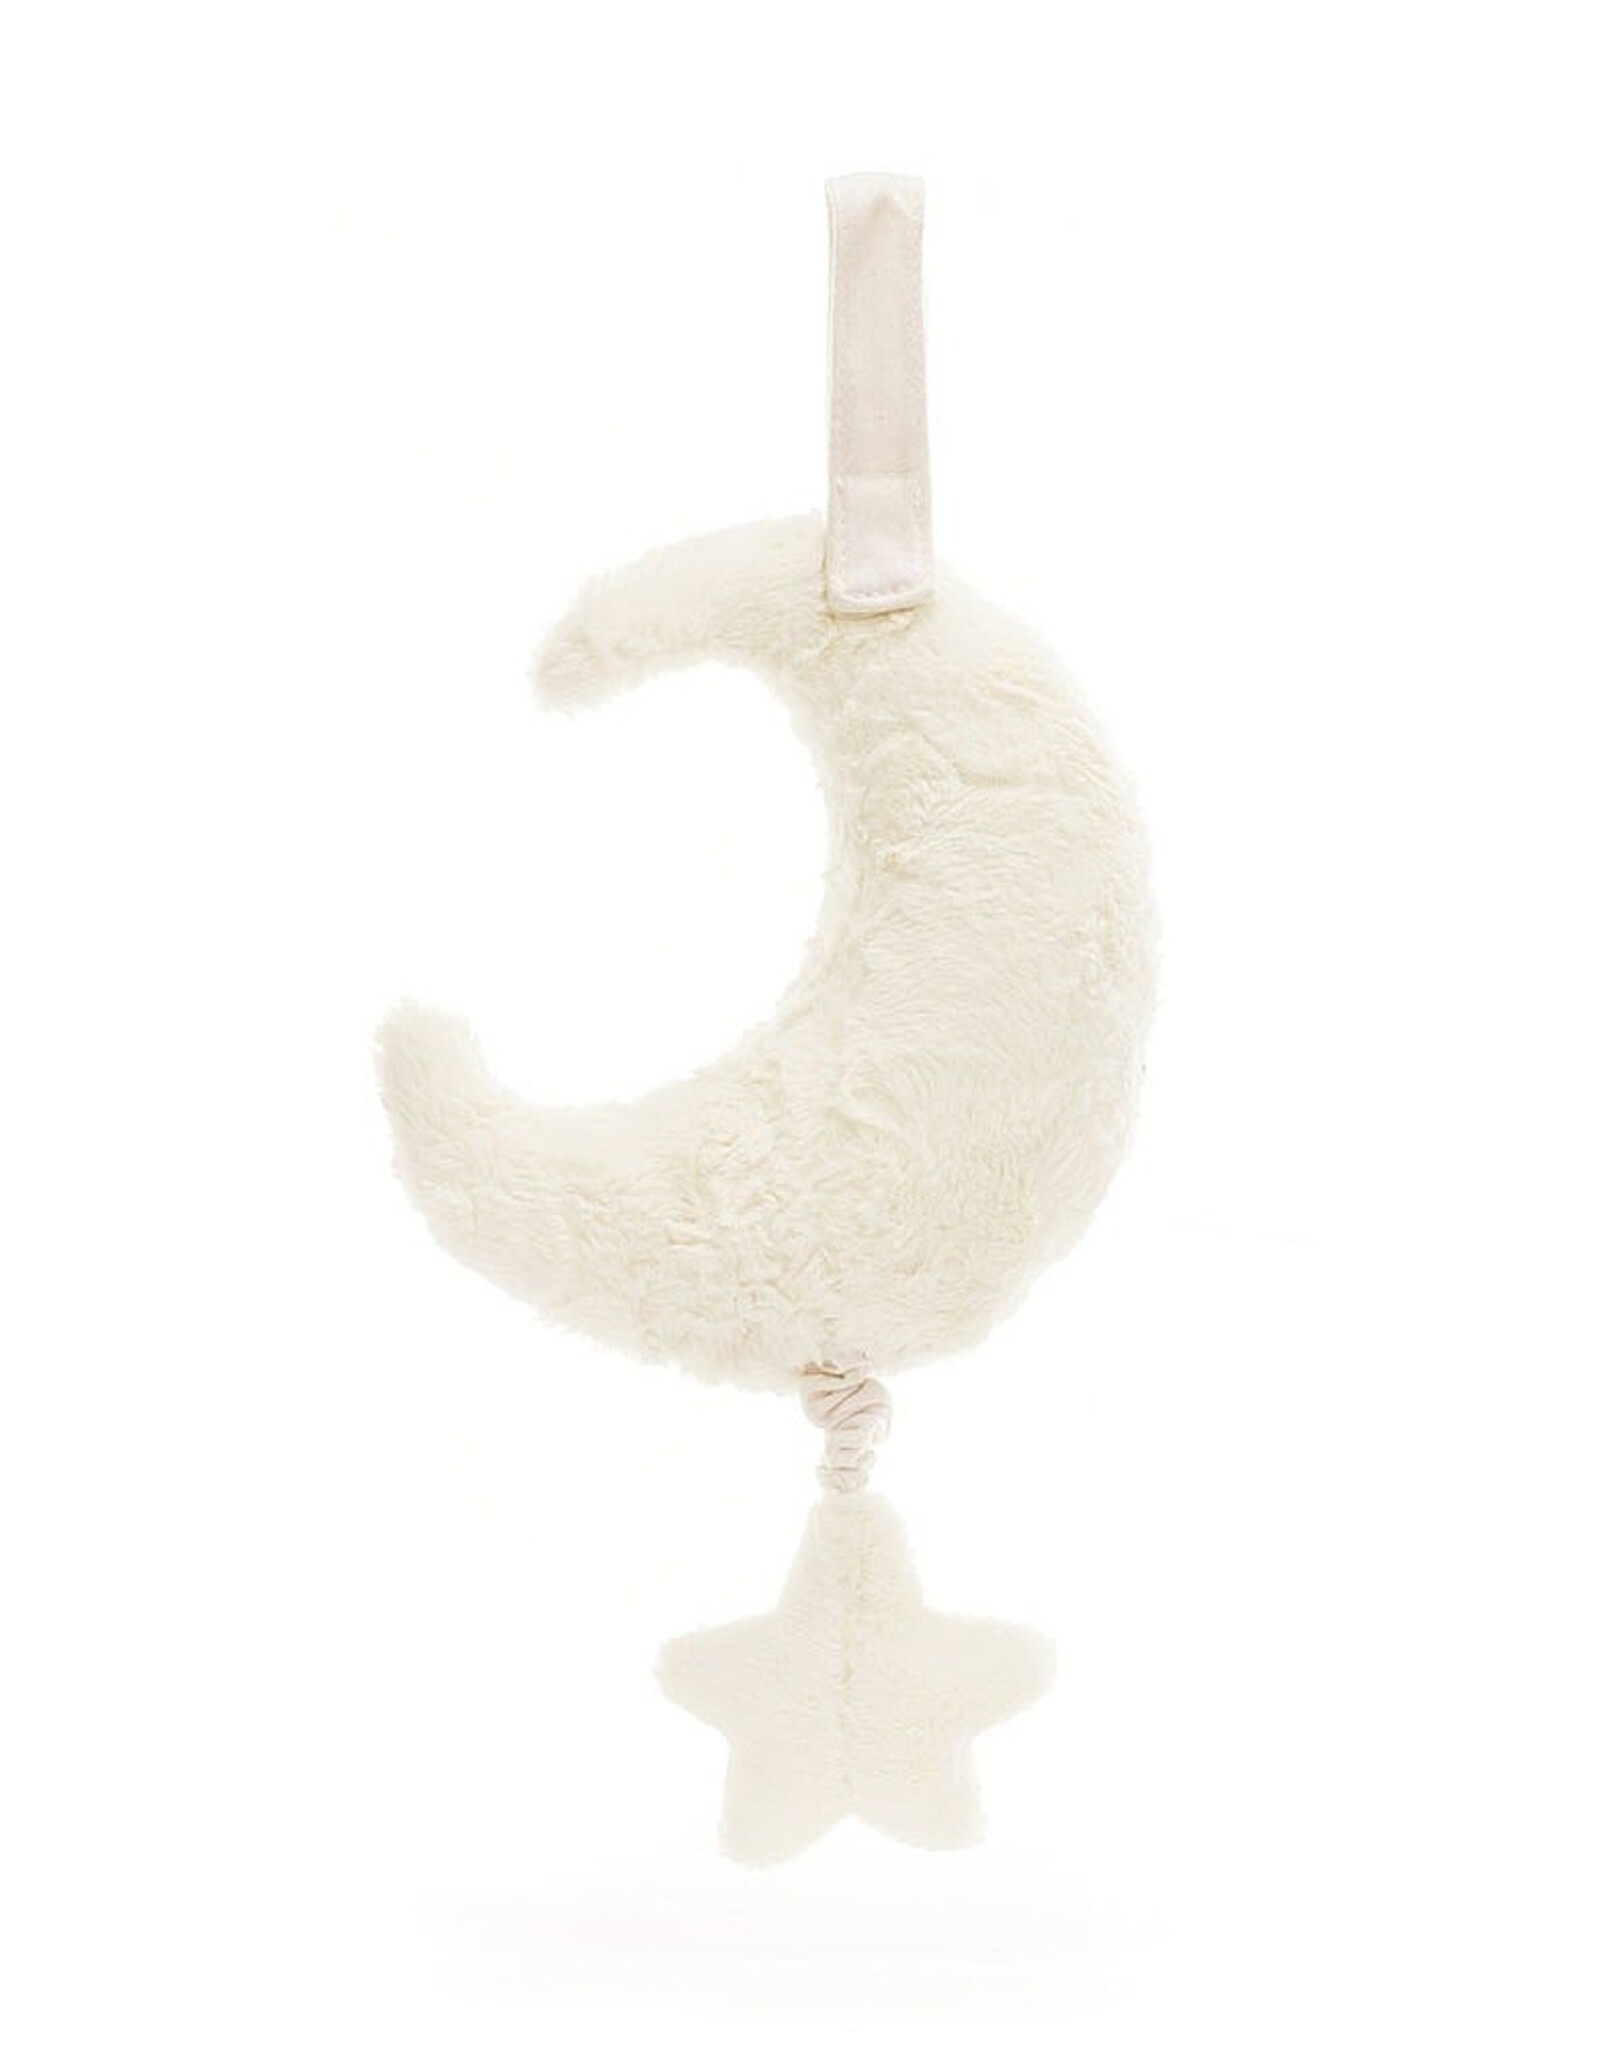 Jellycat Amuseable Moon Musical Pull